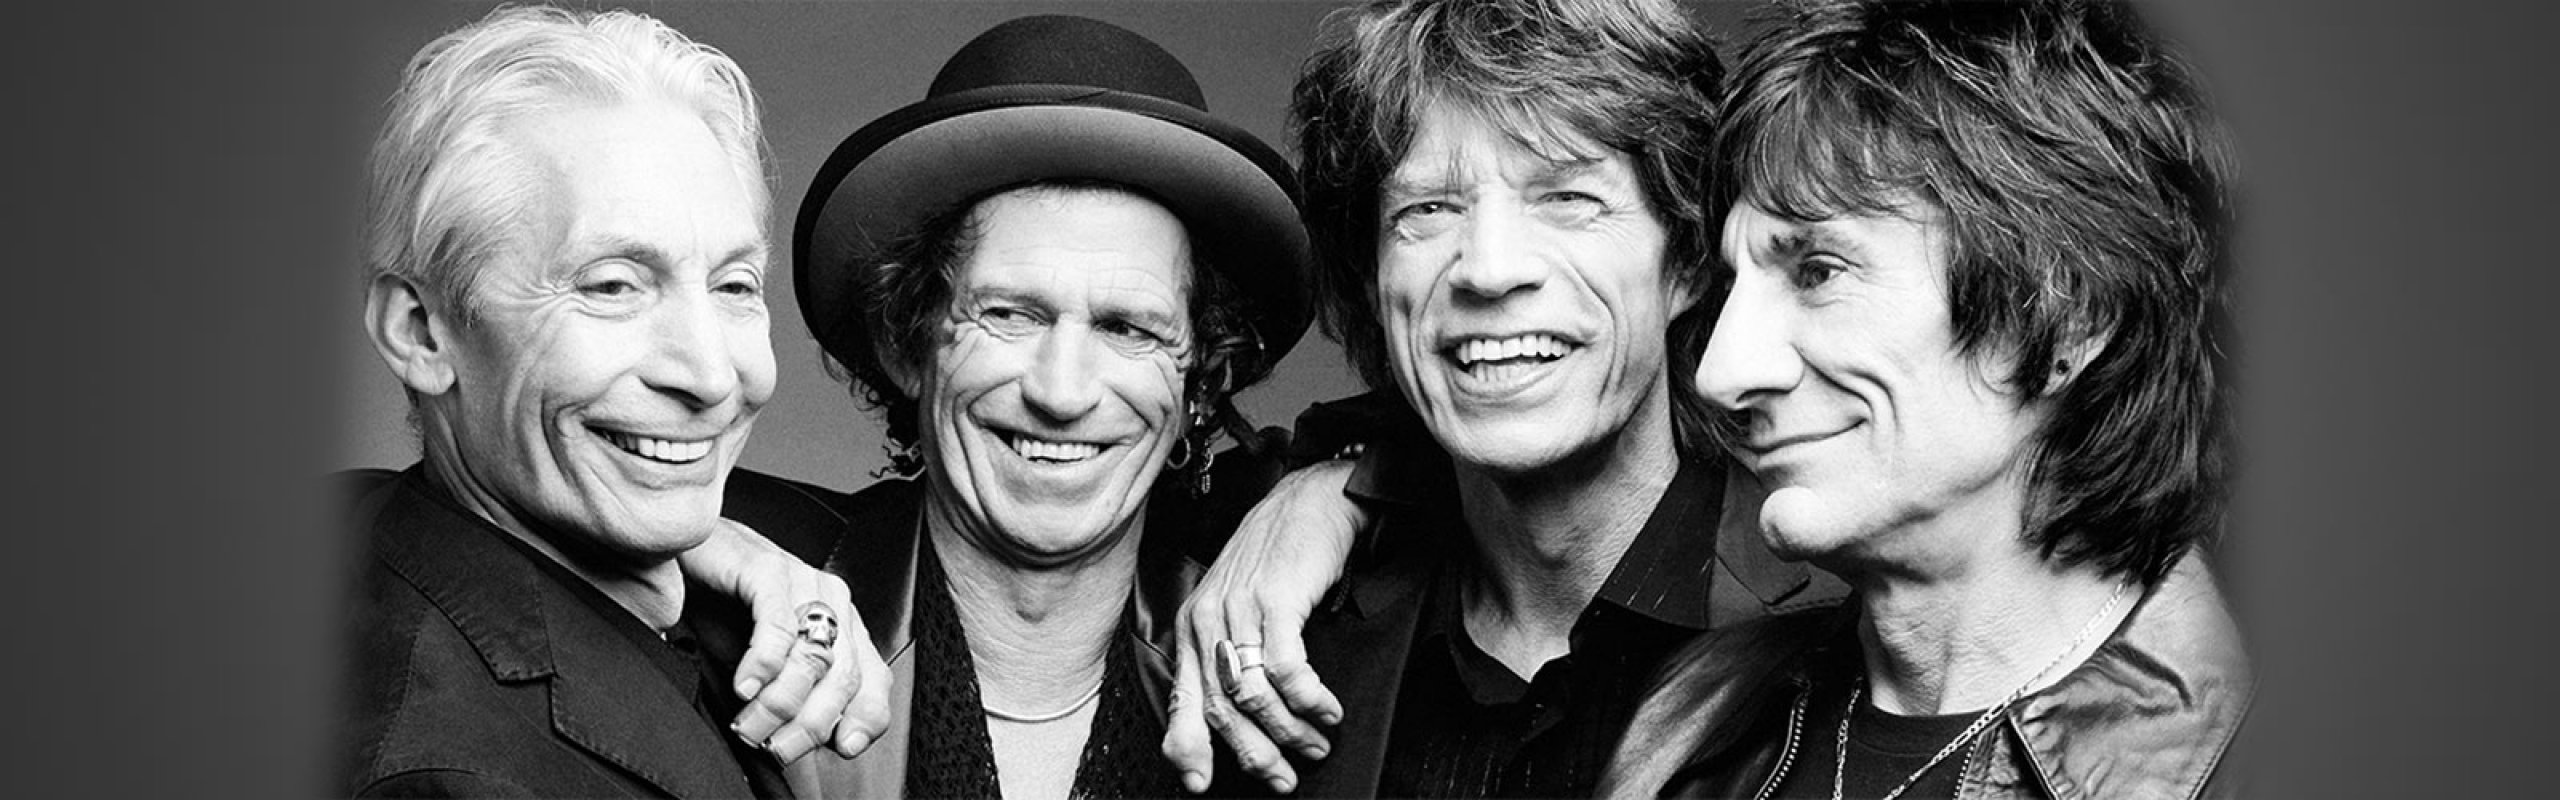 Rock and roll diplomacy: how American music influenced the Rolling Stones, and how the Stones changed America